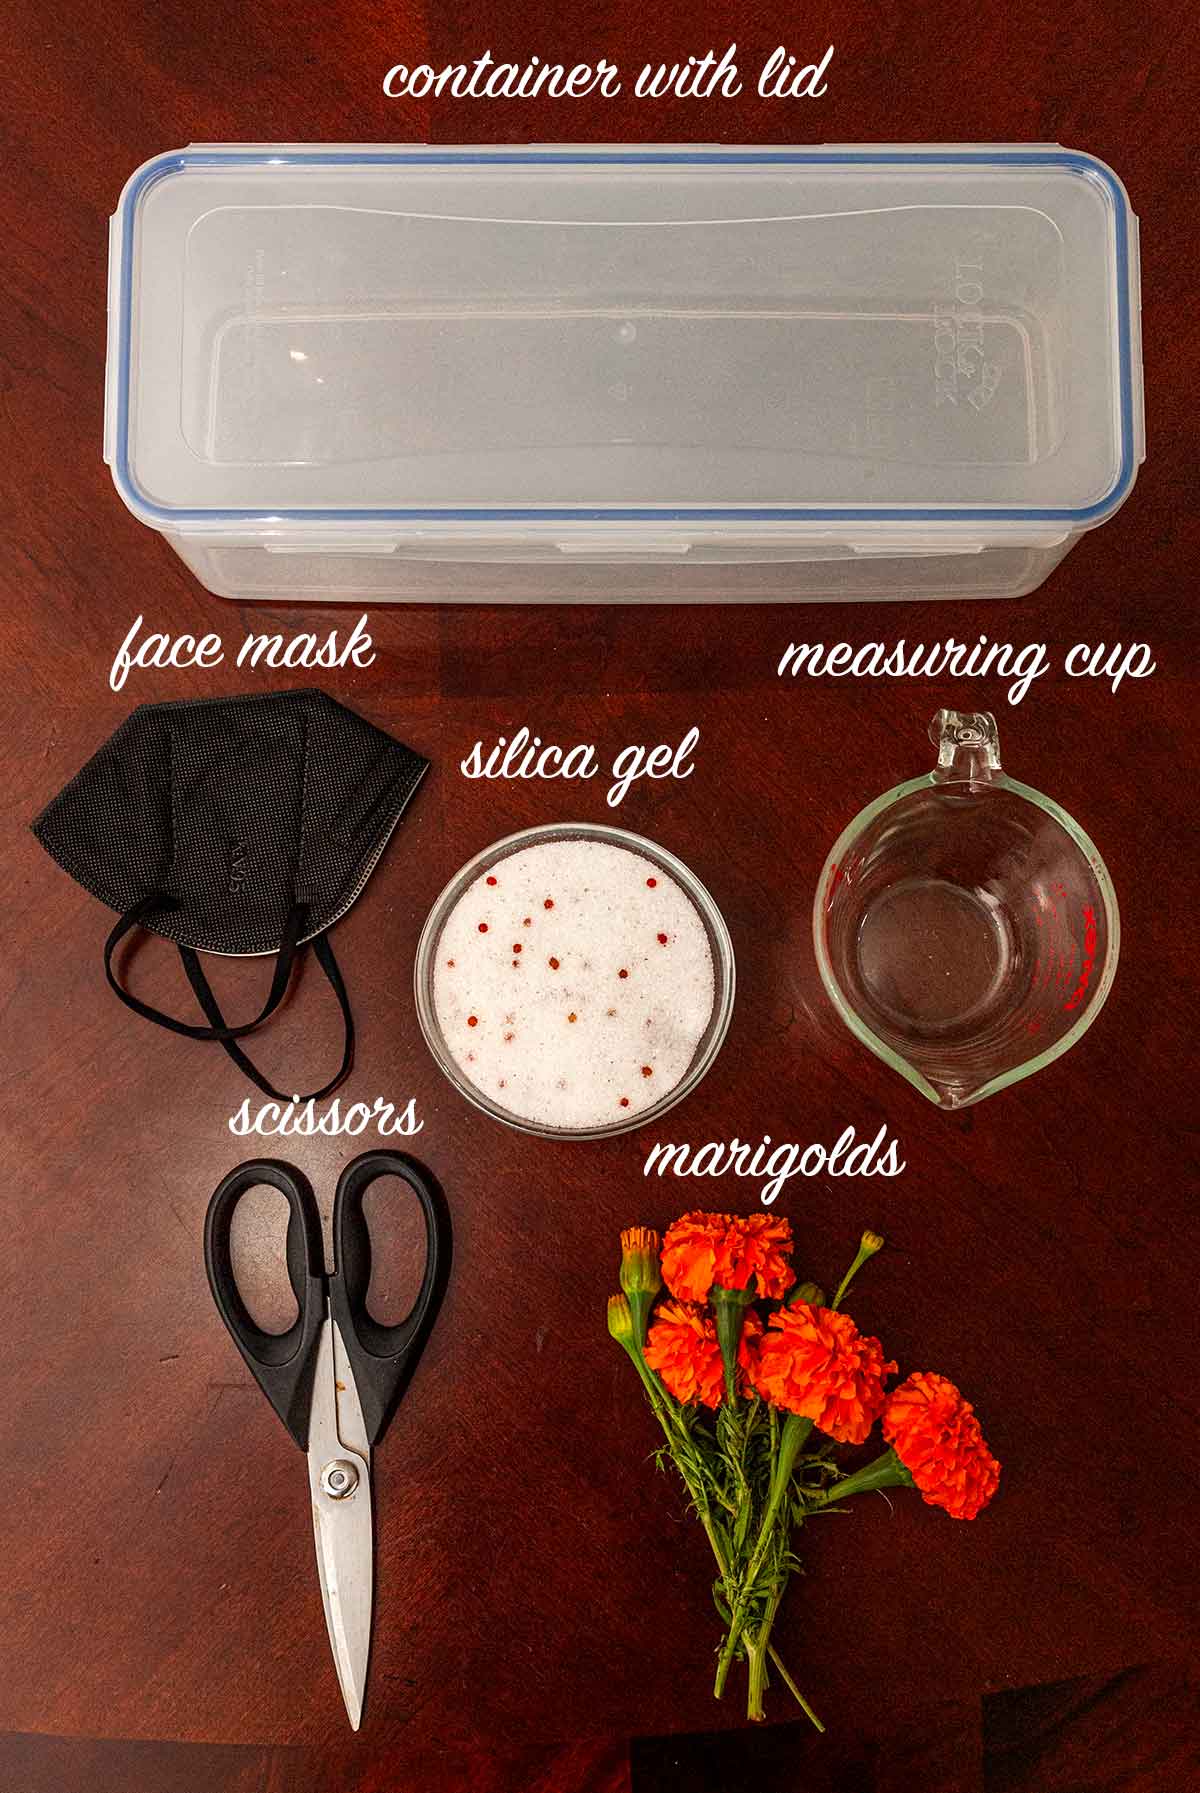 6 objects used to dry marigolds with silica gel on a table with labels describing what they are.